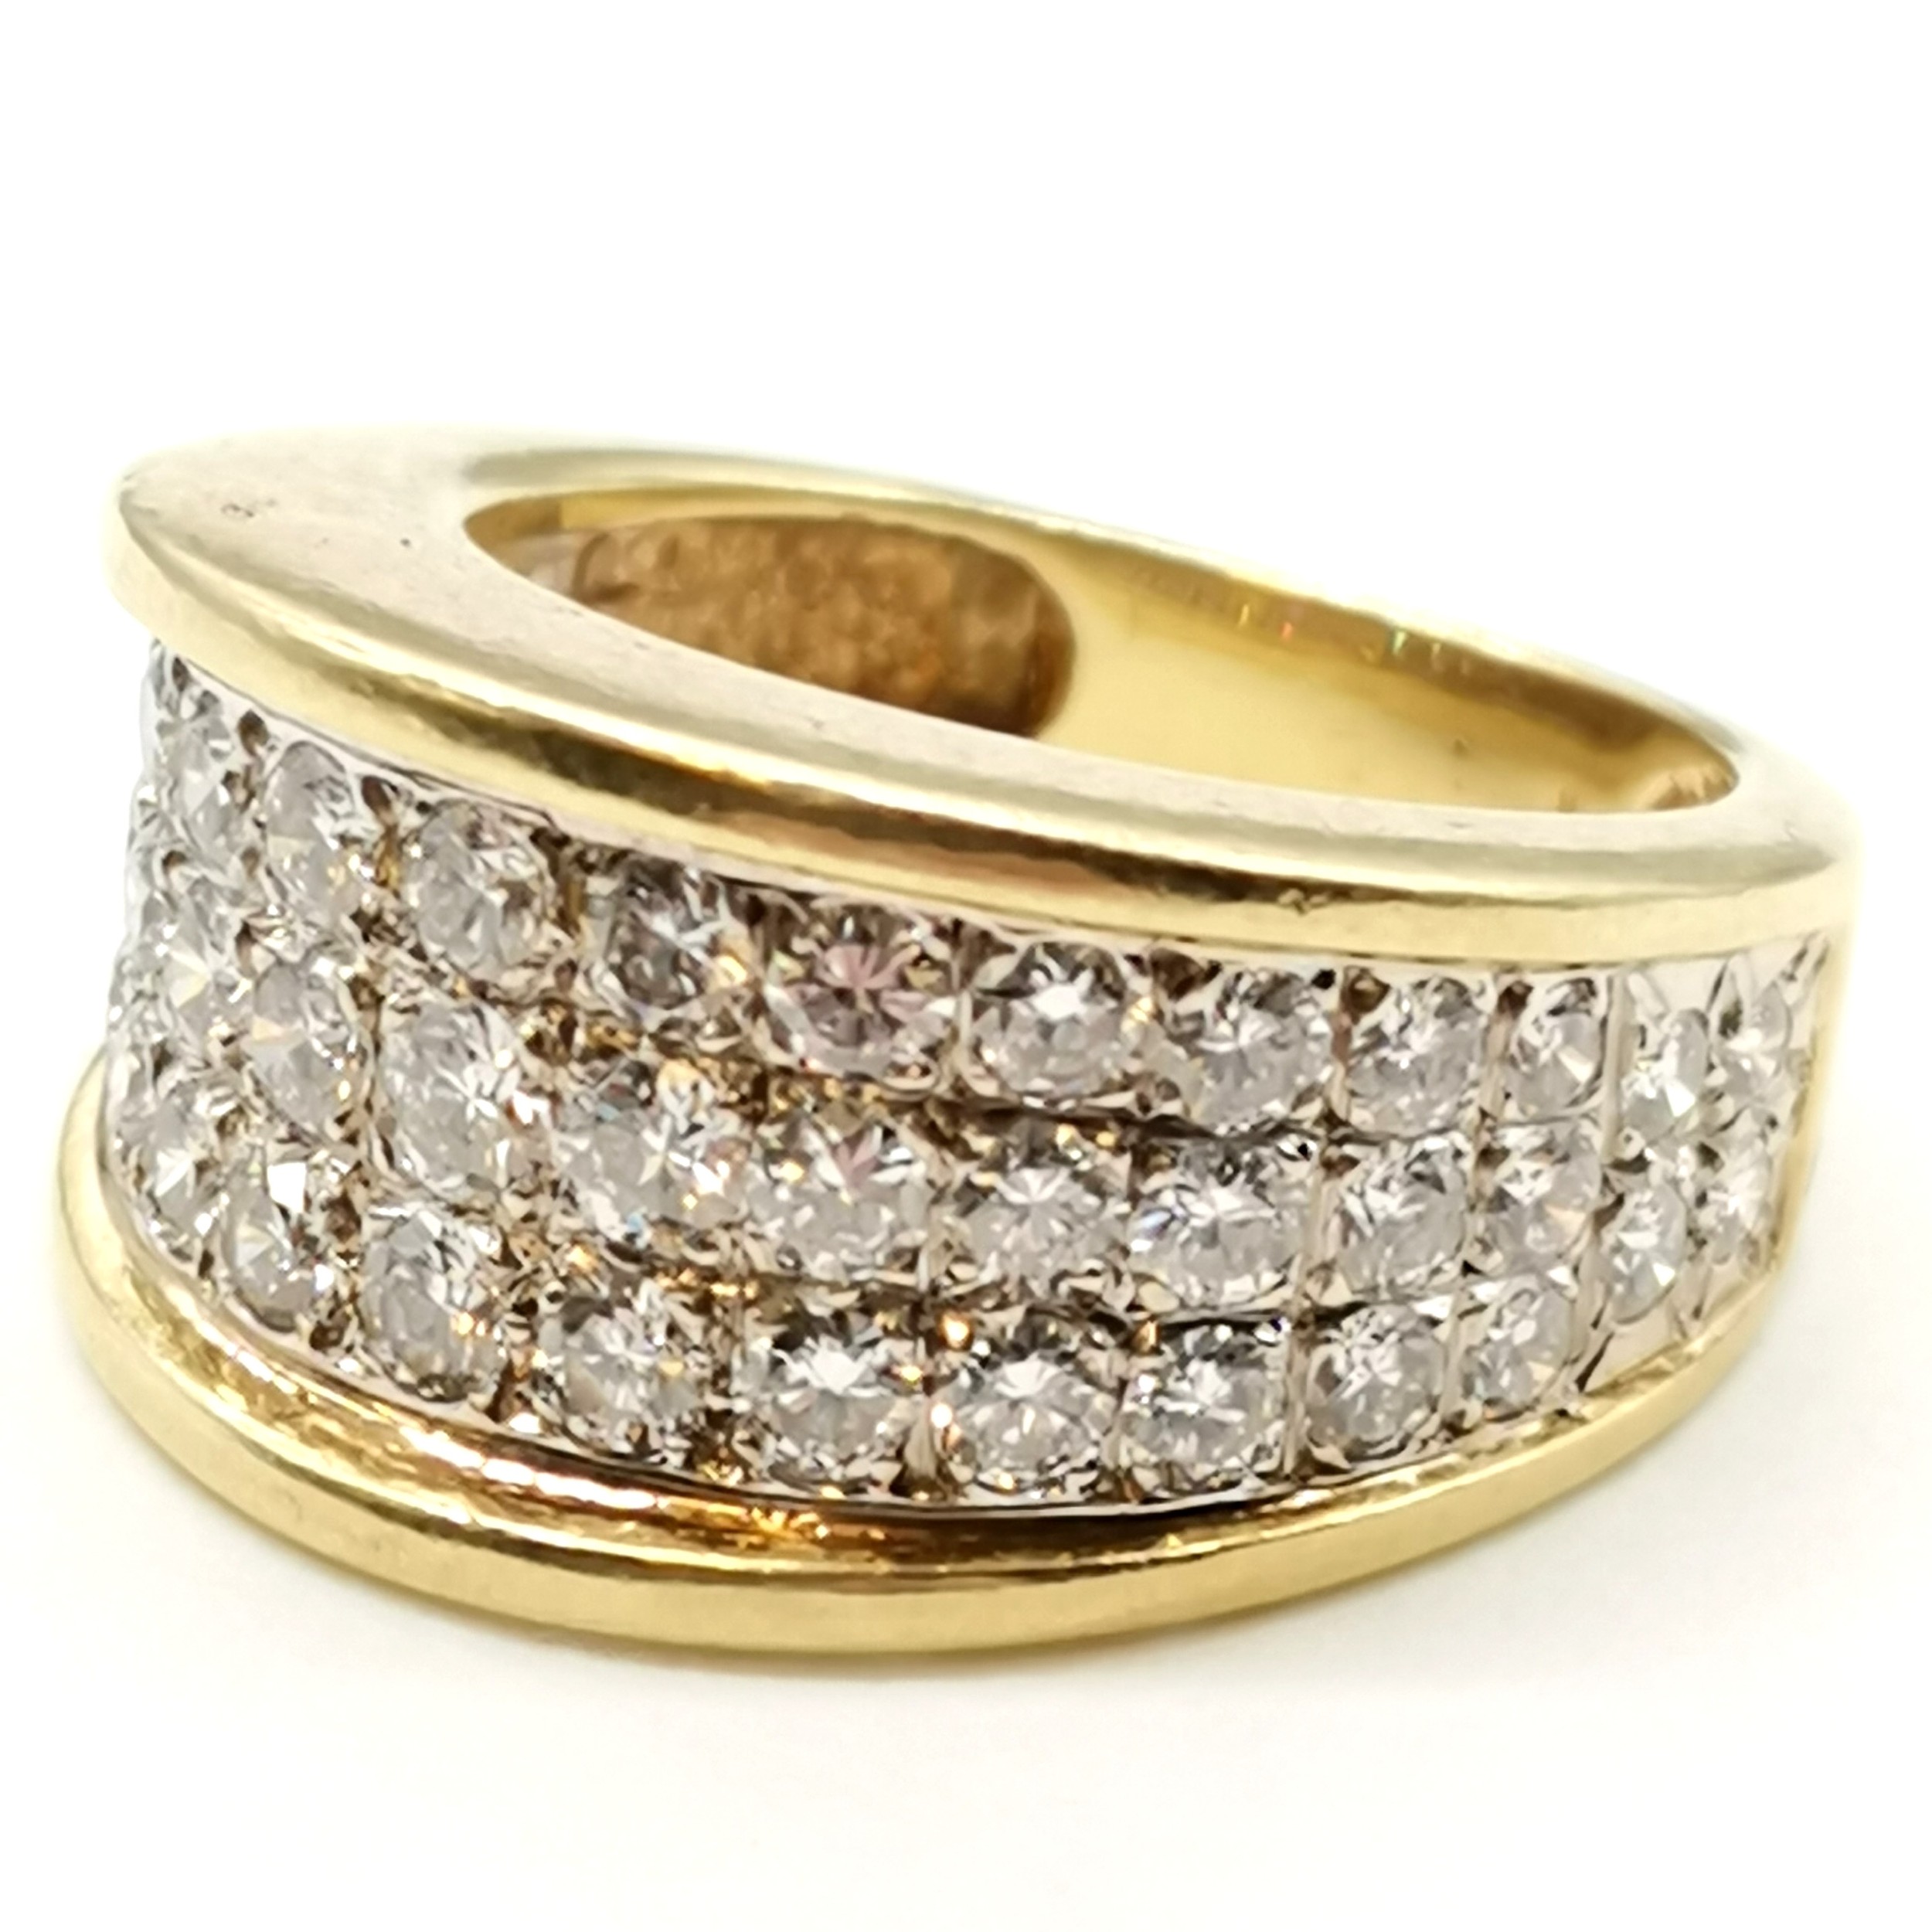 Impressive 18ct gold (unmarked) ring set with 47 diamonds in 3 rows - size L & 10.4g total weight - Image 3 of 3